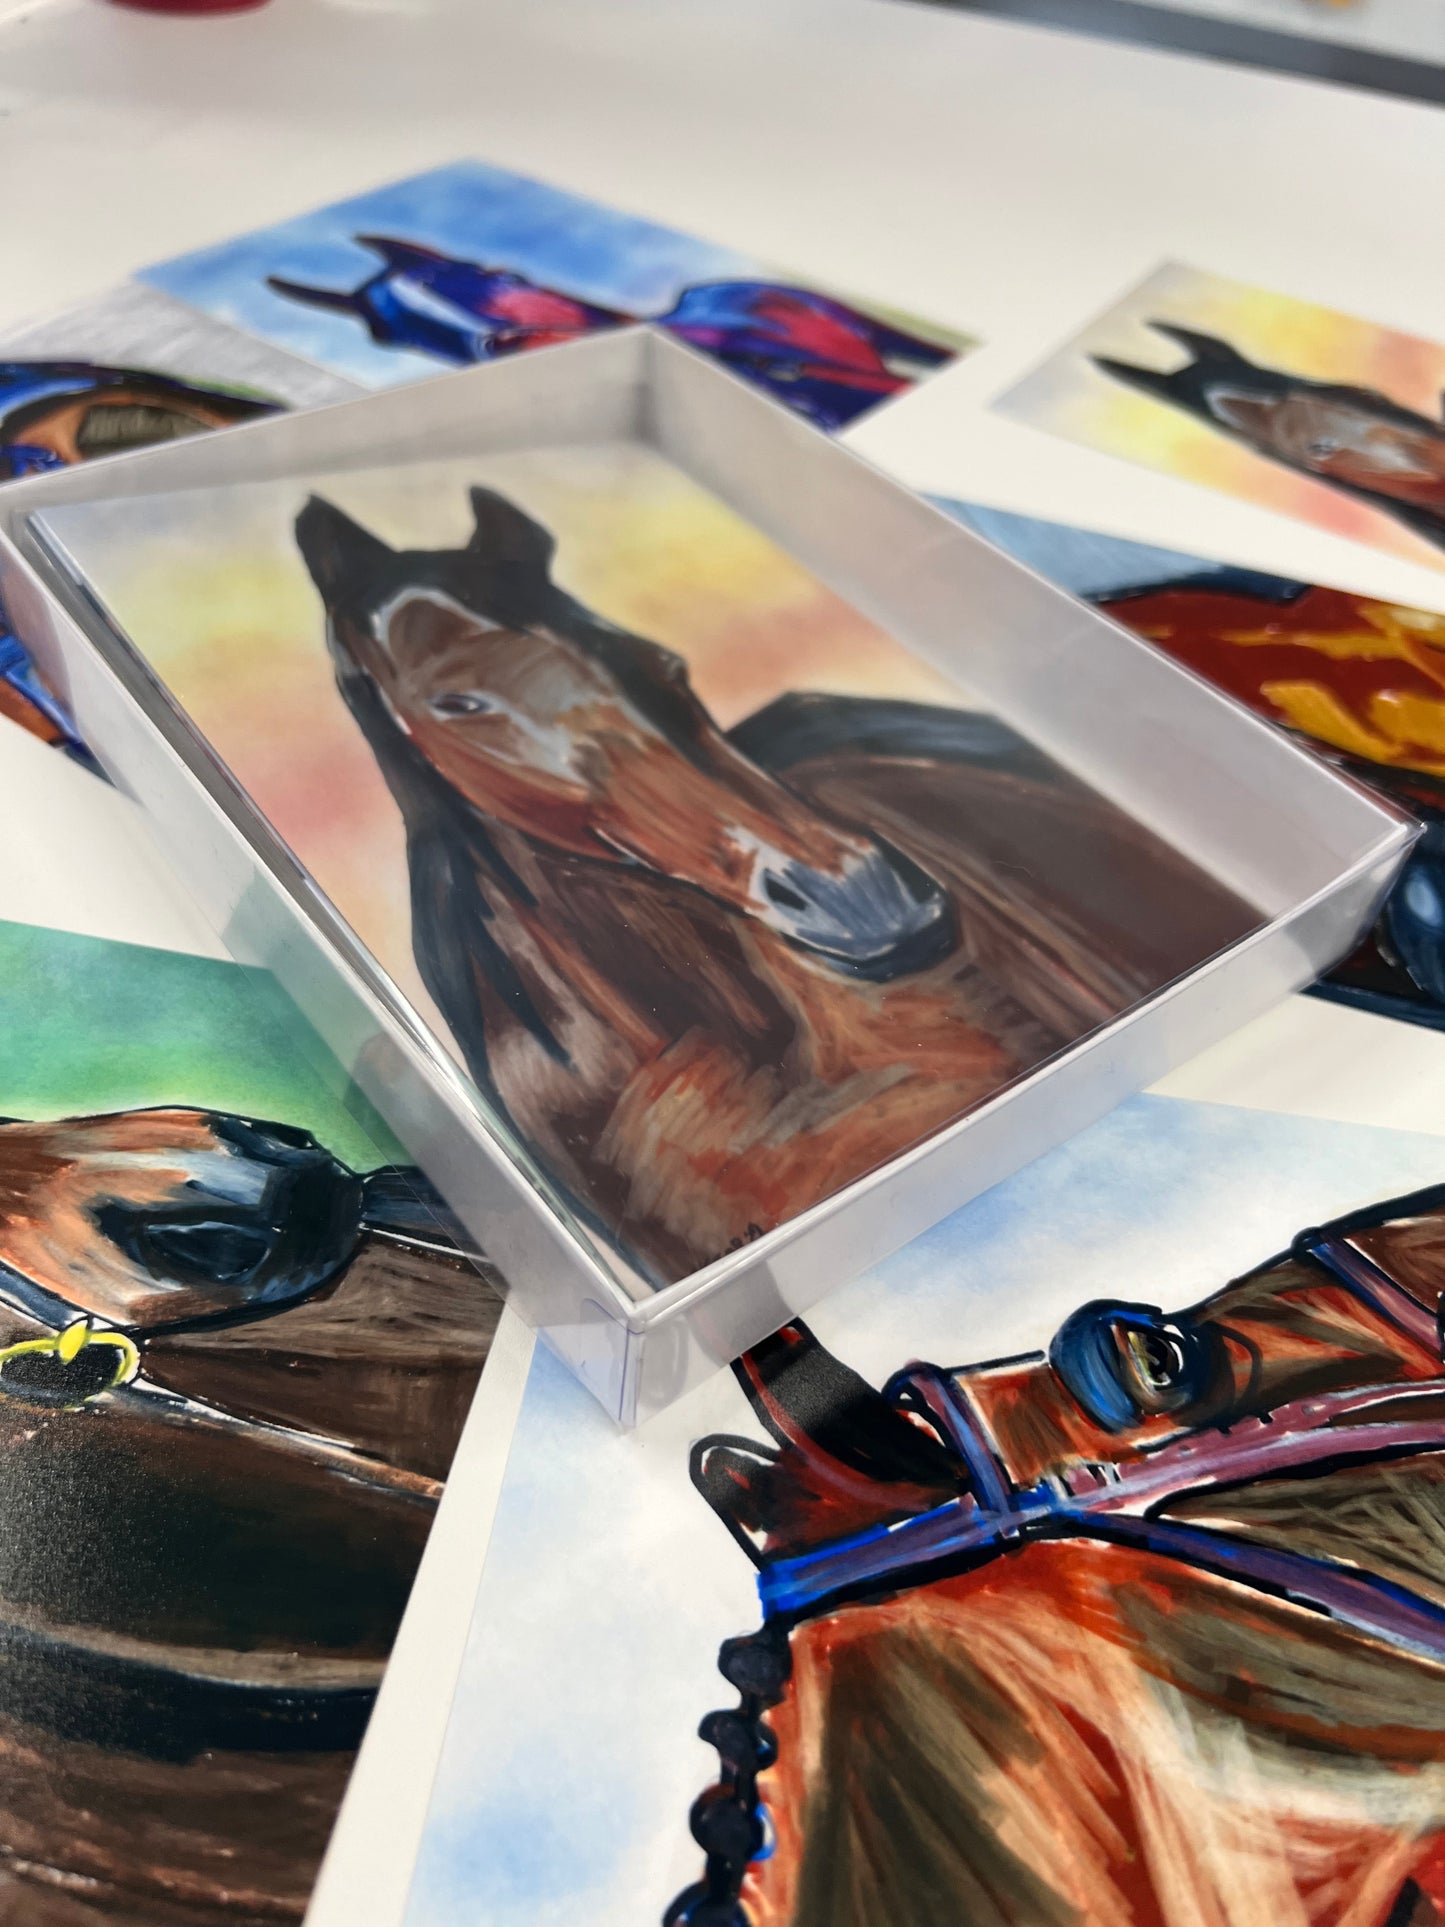 Horses - Set of 6 prints in size 5x7"